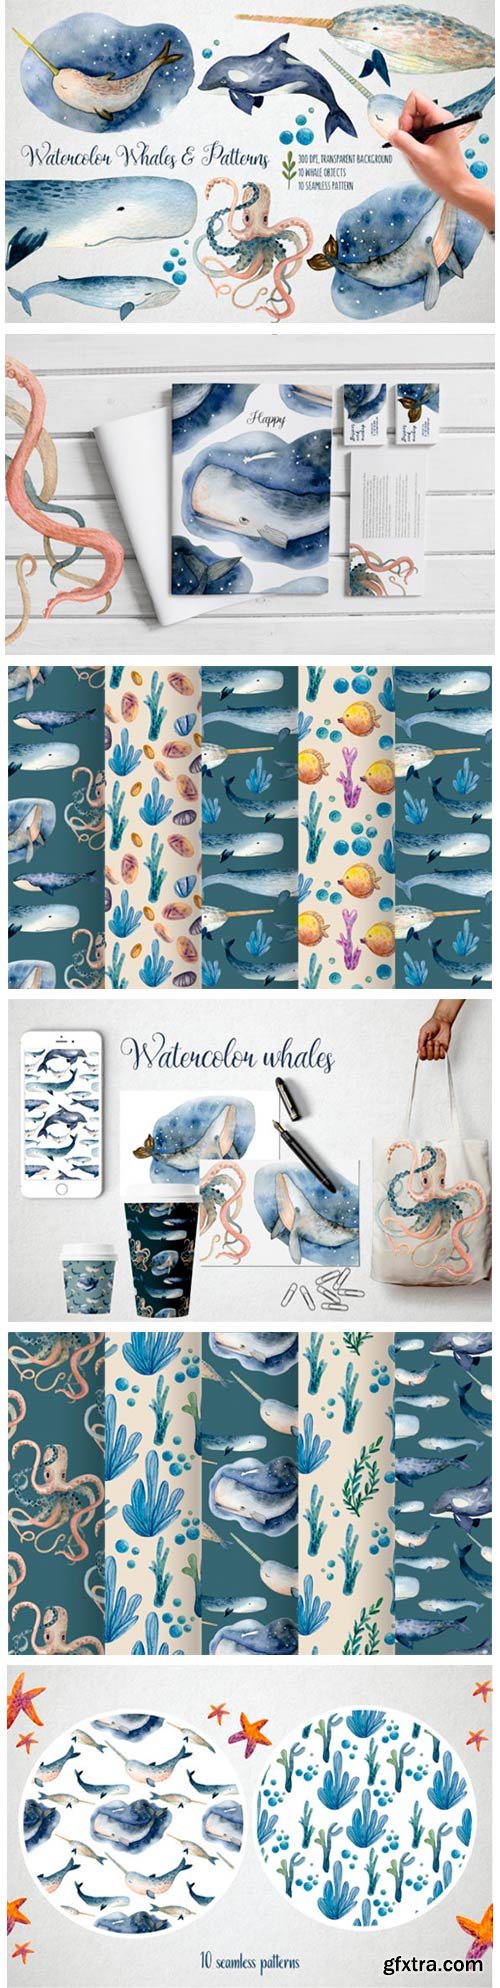 Watercolor Whales & Patterns 5872171